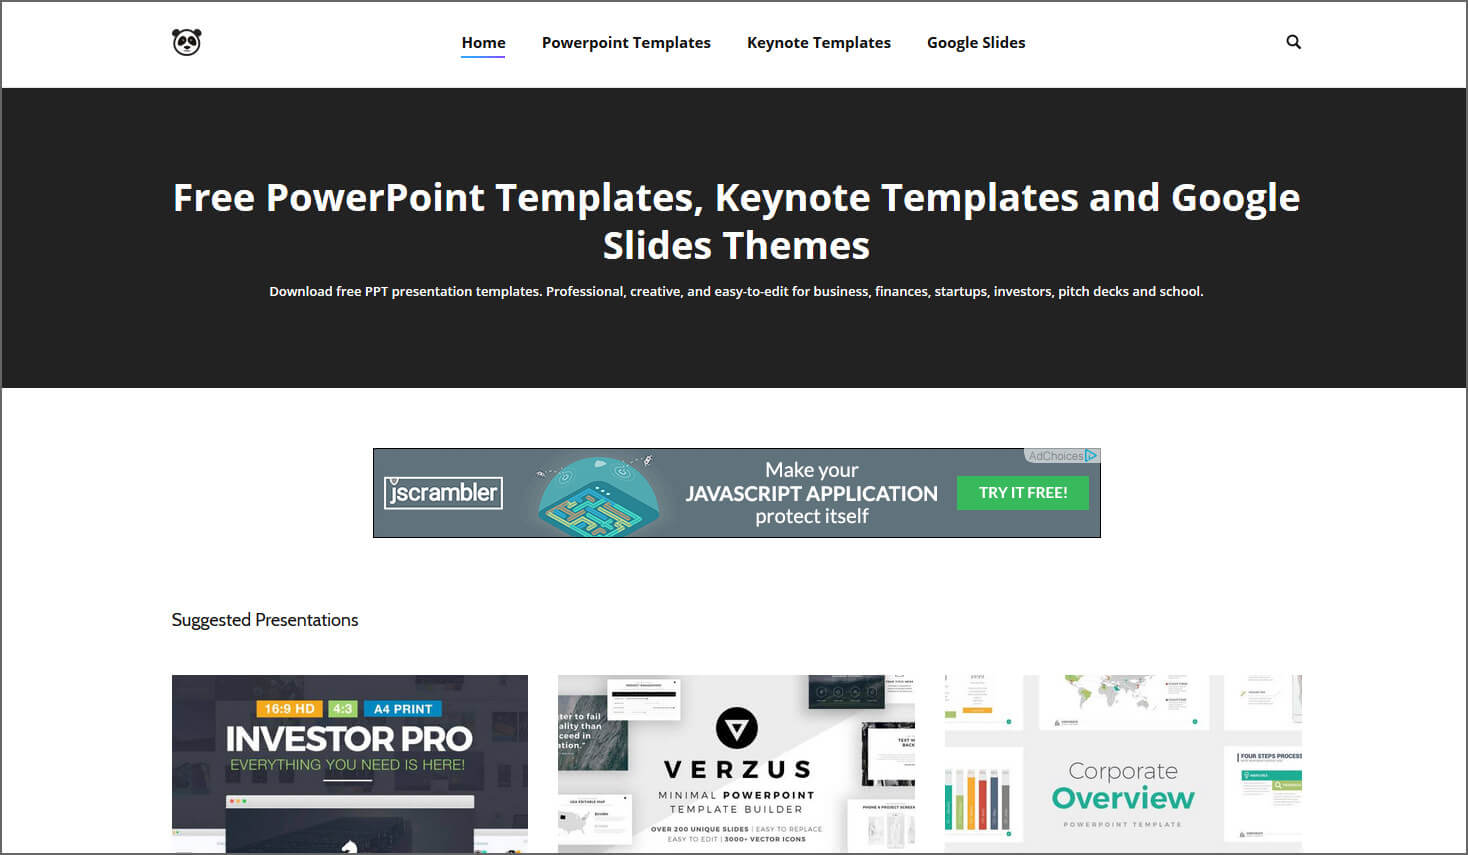 4 Sites With Free Beautiful Powerpoint Templates, Keynotes With Regard To Virus Powerpoint Template Free Download